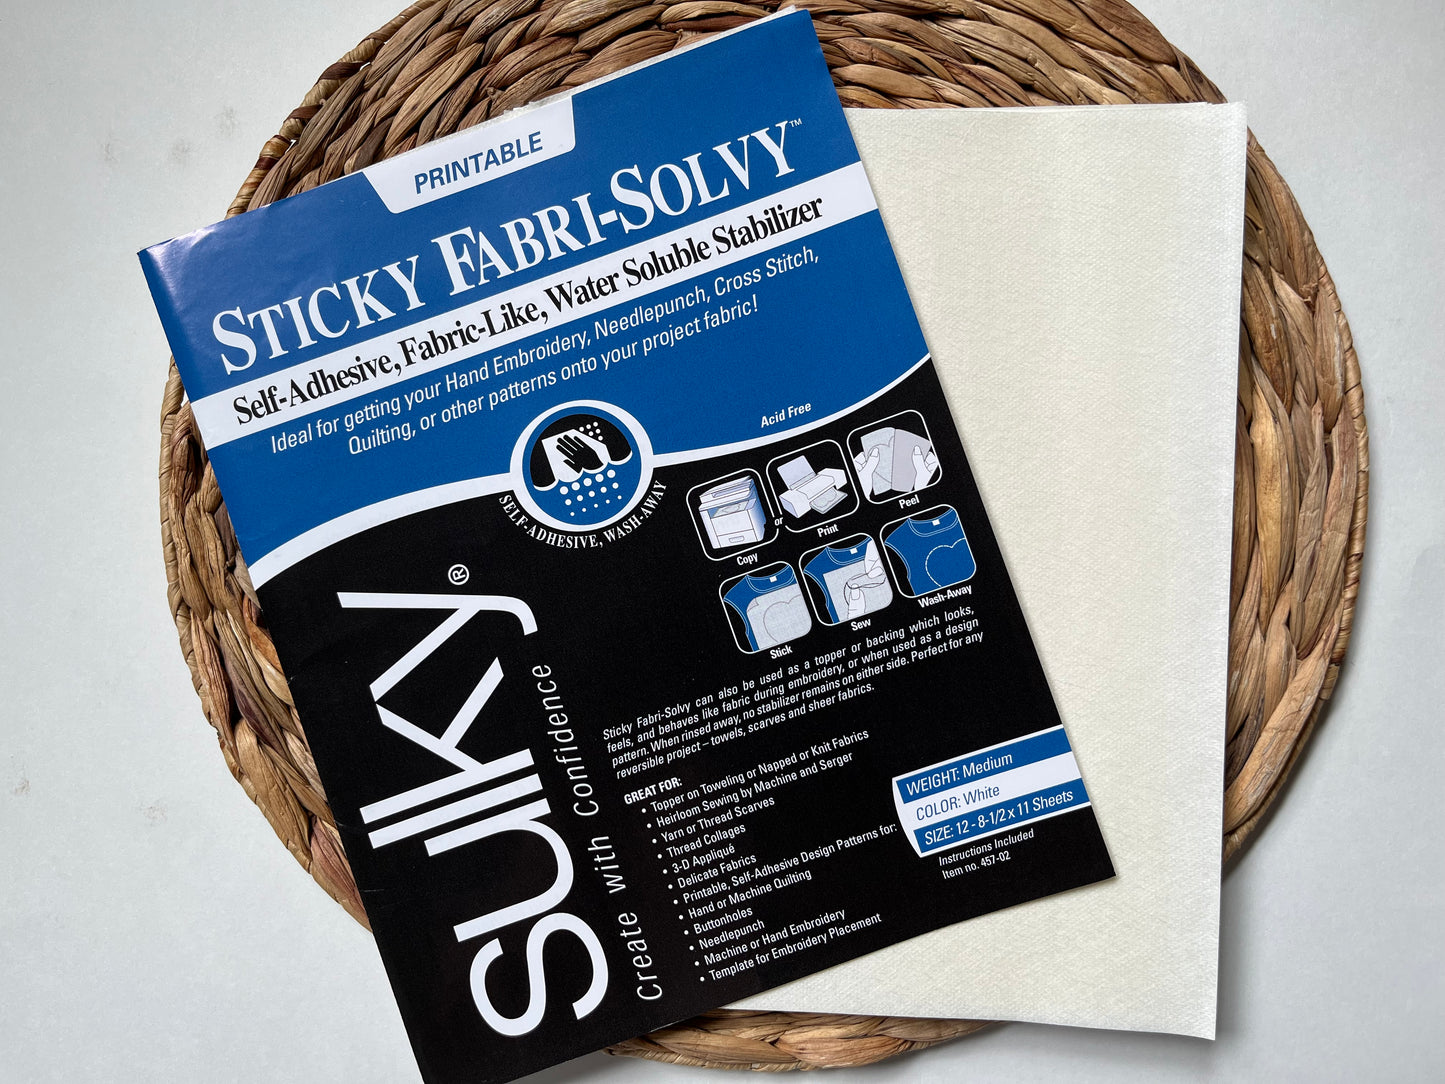 Sulky Fabri-Solvy Water Soluble Printable Sheets